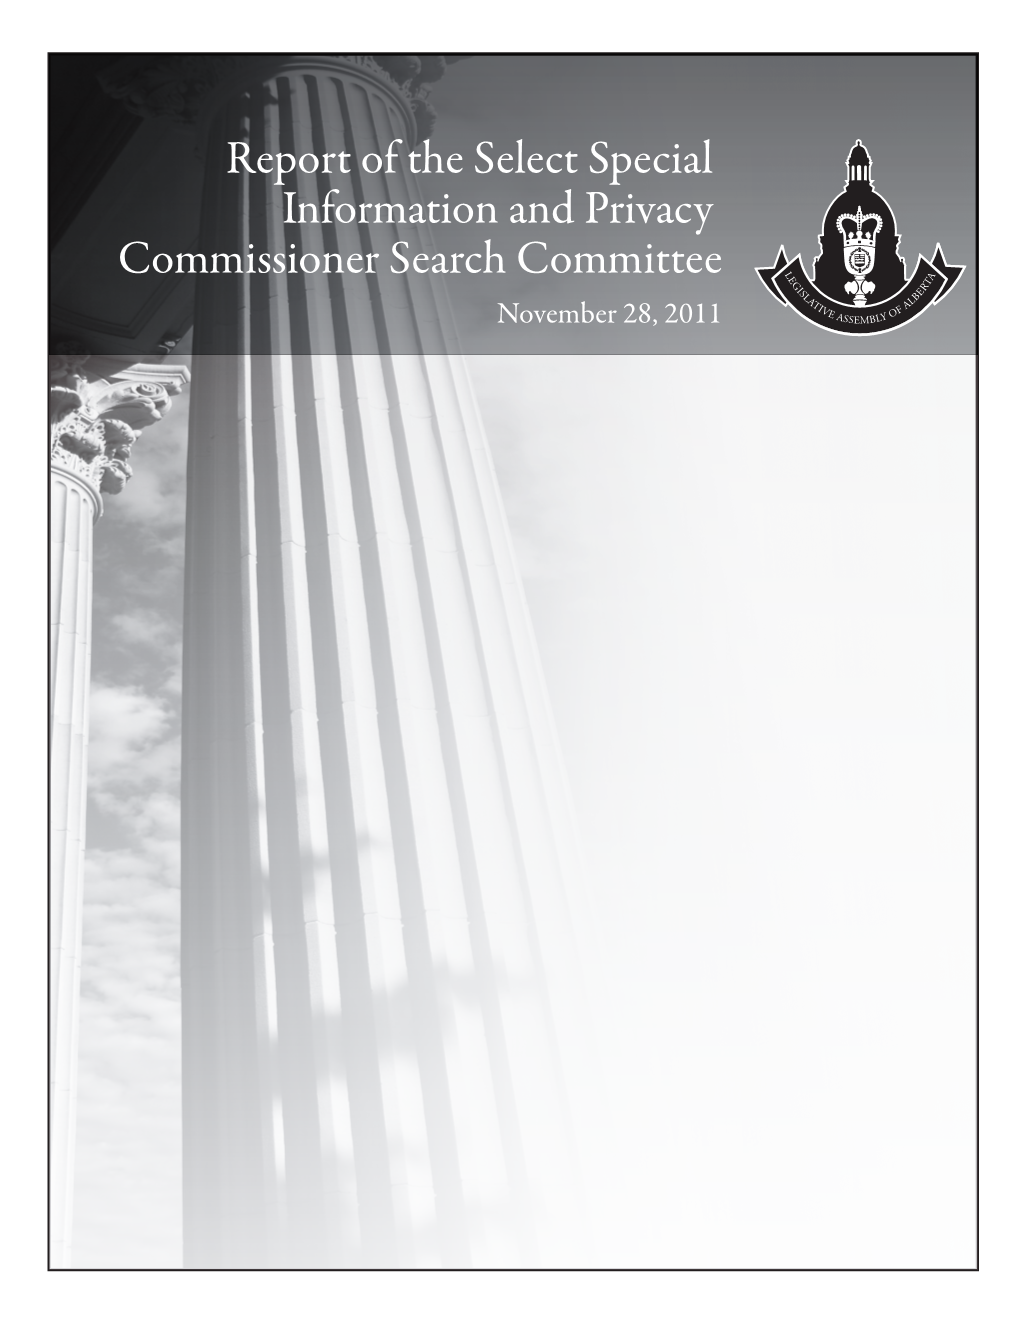 Report of the Select Special Information and Privacy Commissioner Search Committee November 28, 2011